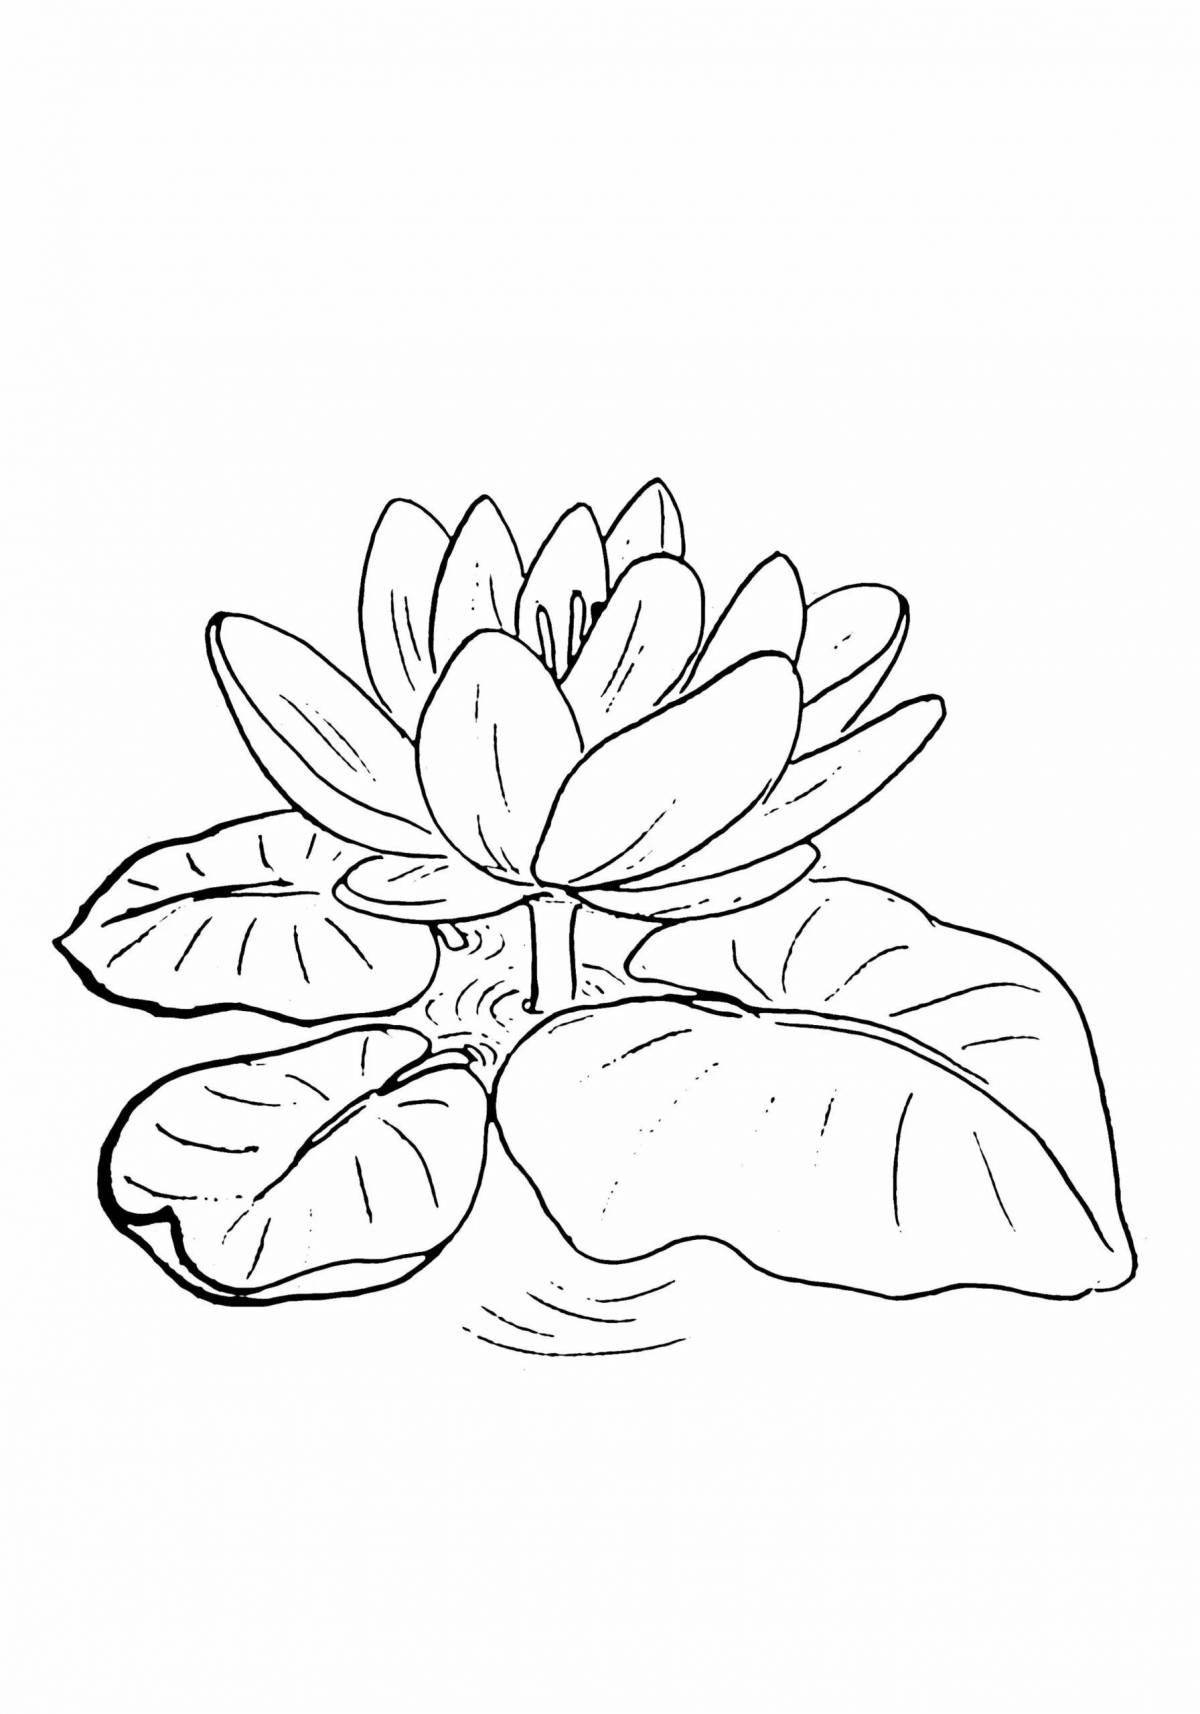 Coloring page blissful white water lily